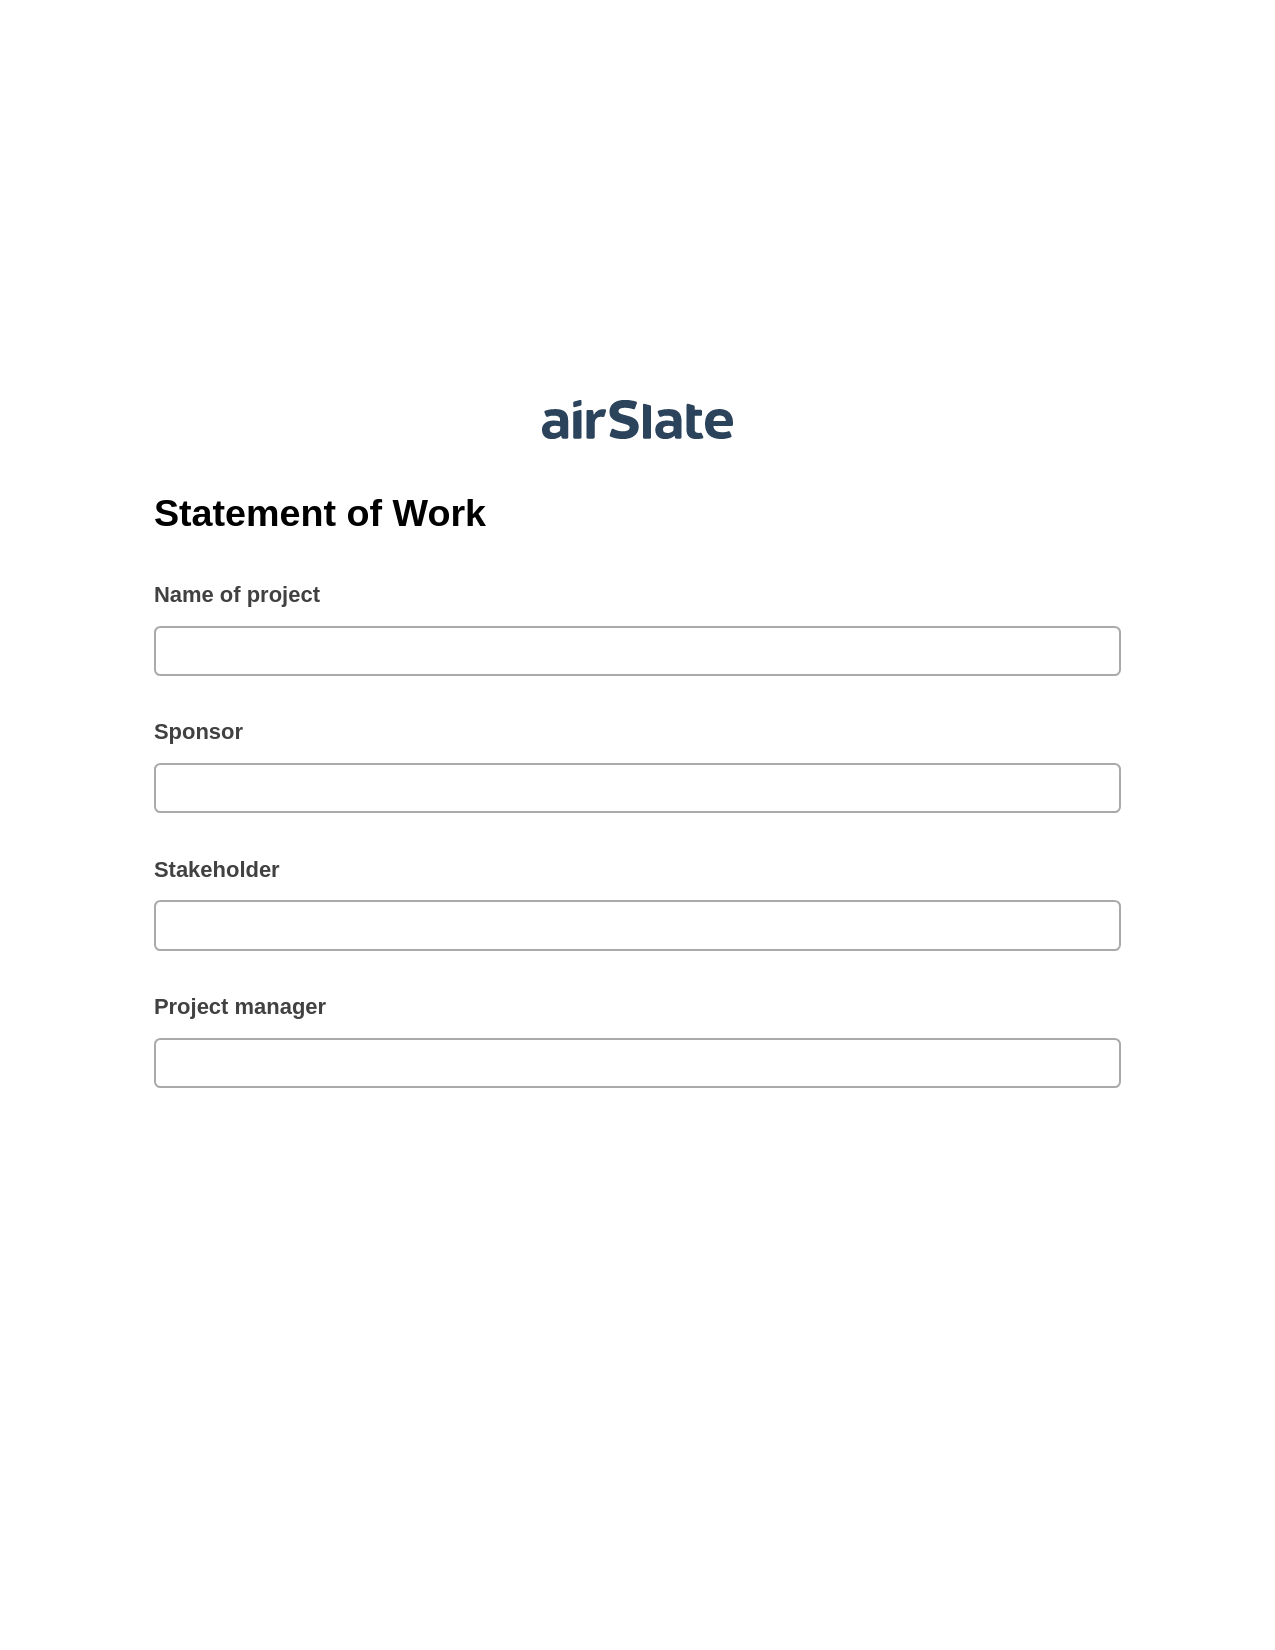 Statement of Work Pre-fill from Google Sheet Dropdown Options Bot, Assign Roles to Recipients Bot, Box Bot